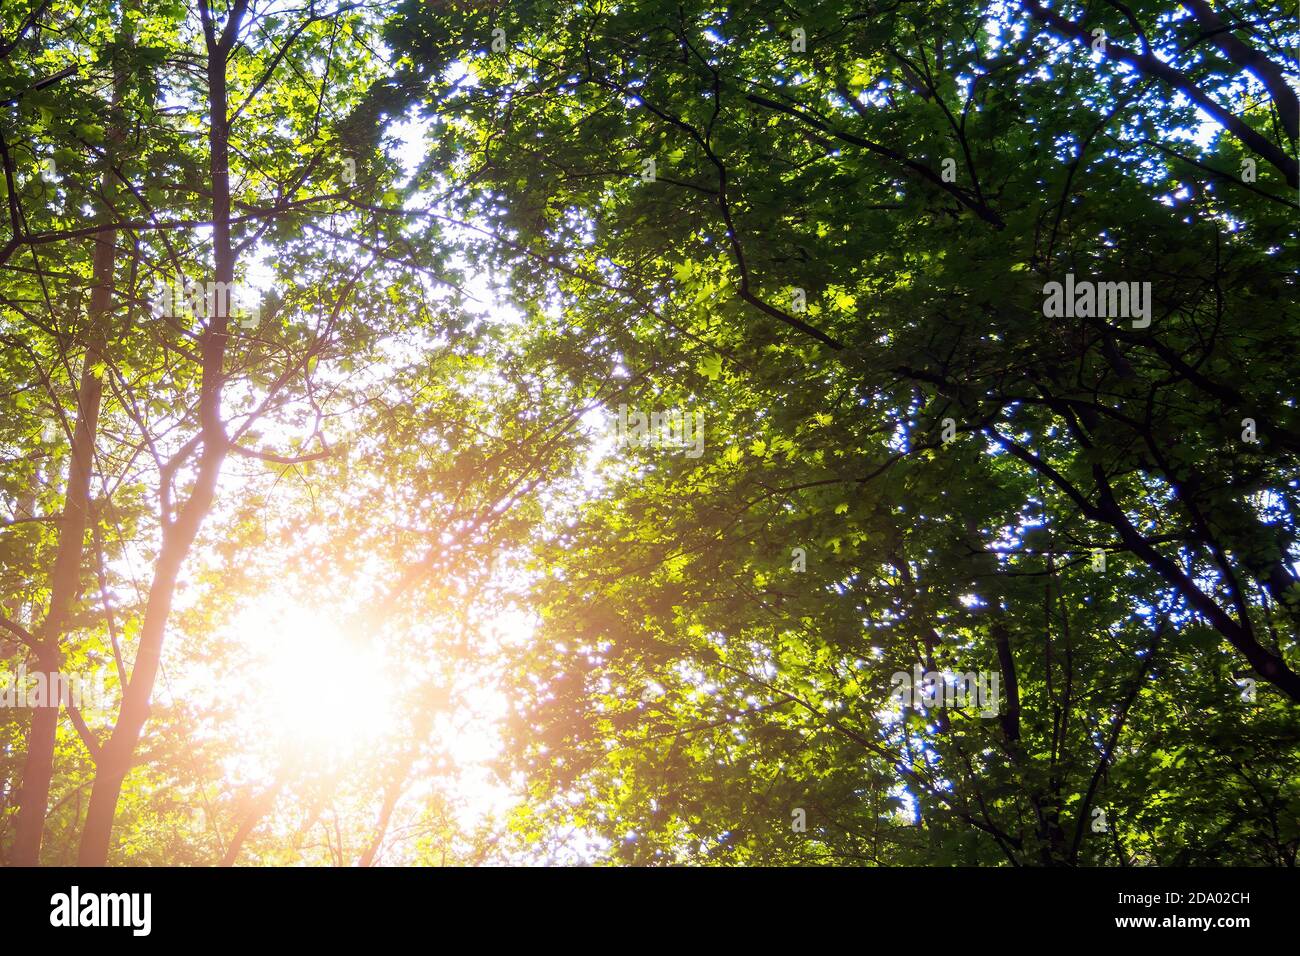 Sun shines through green foliage of trees in forest on summer day Stock Photo